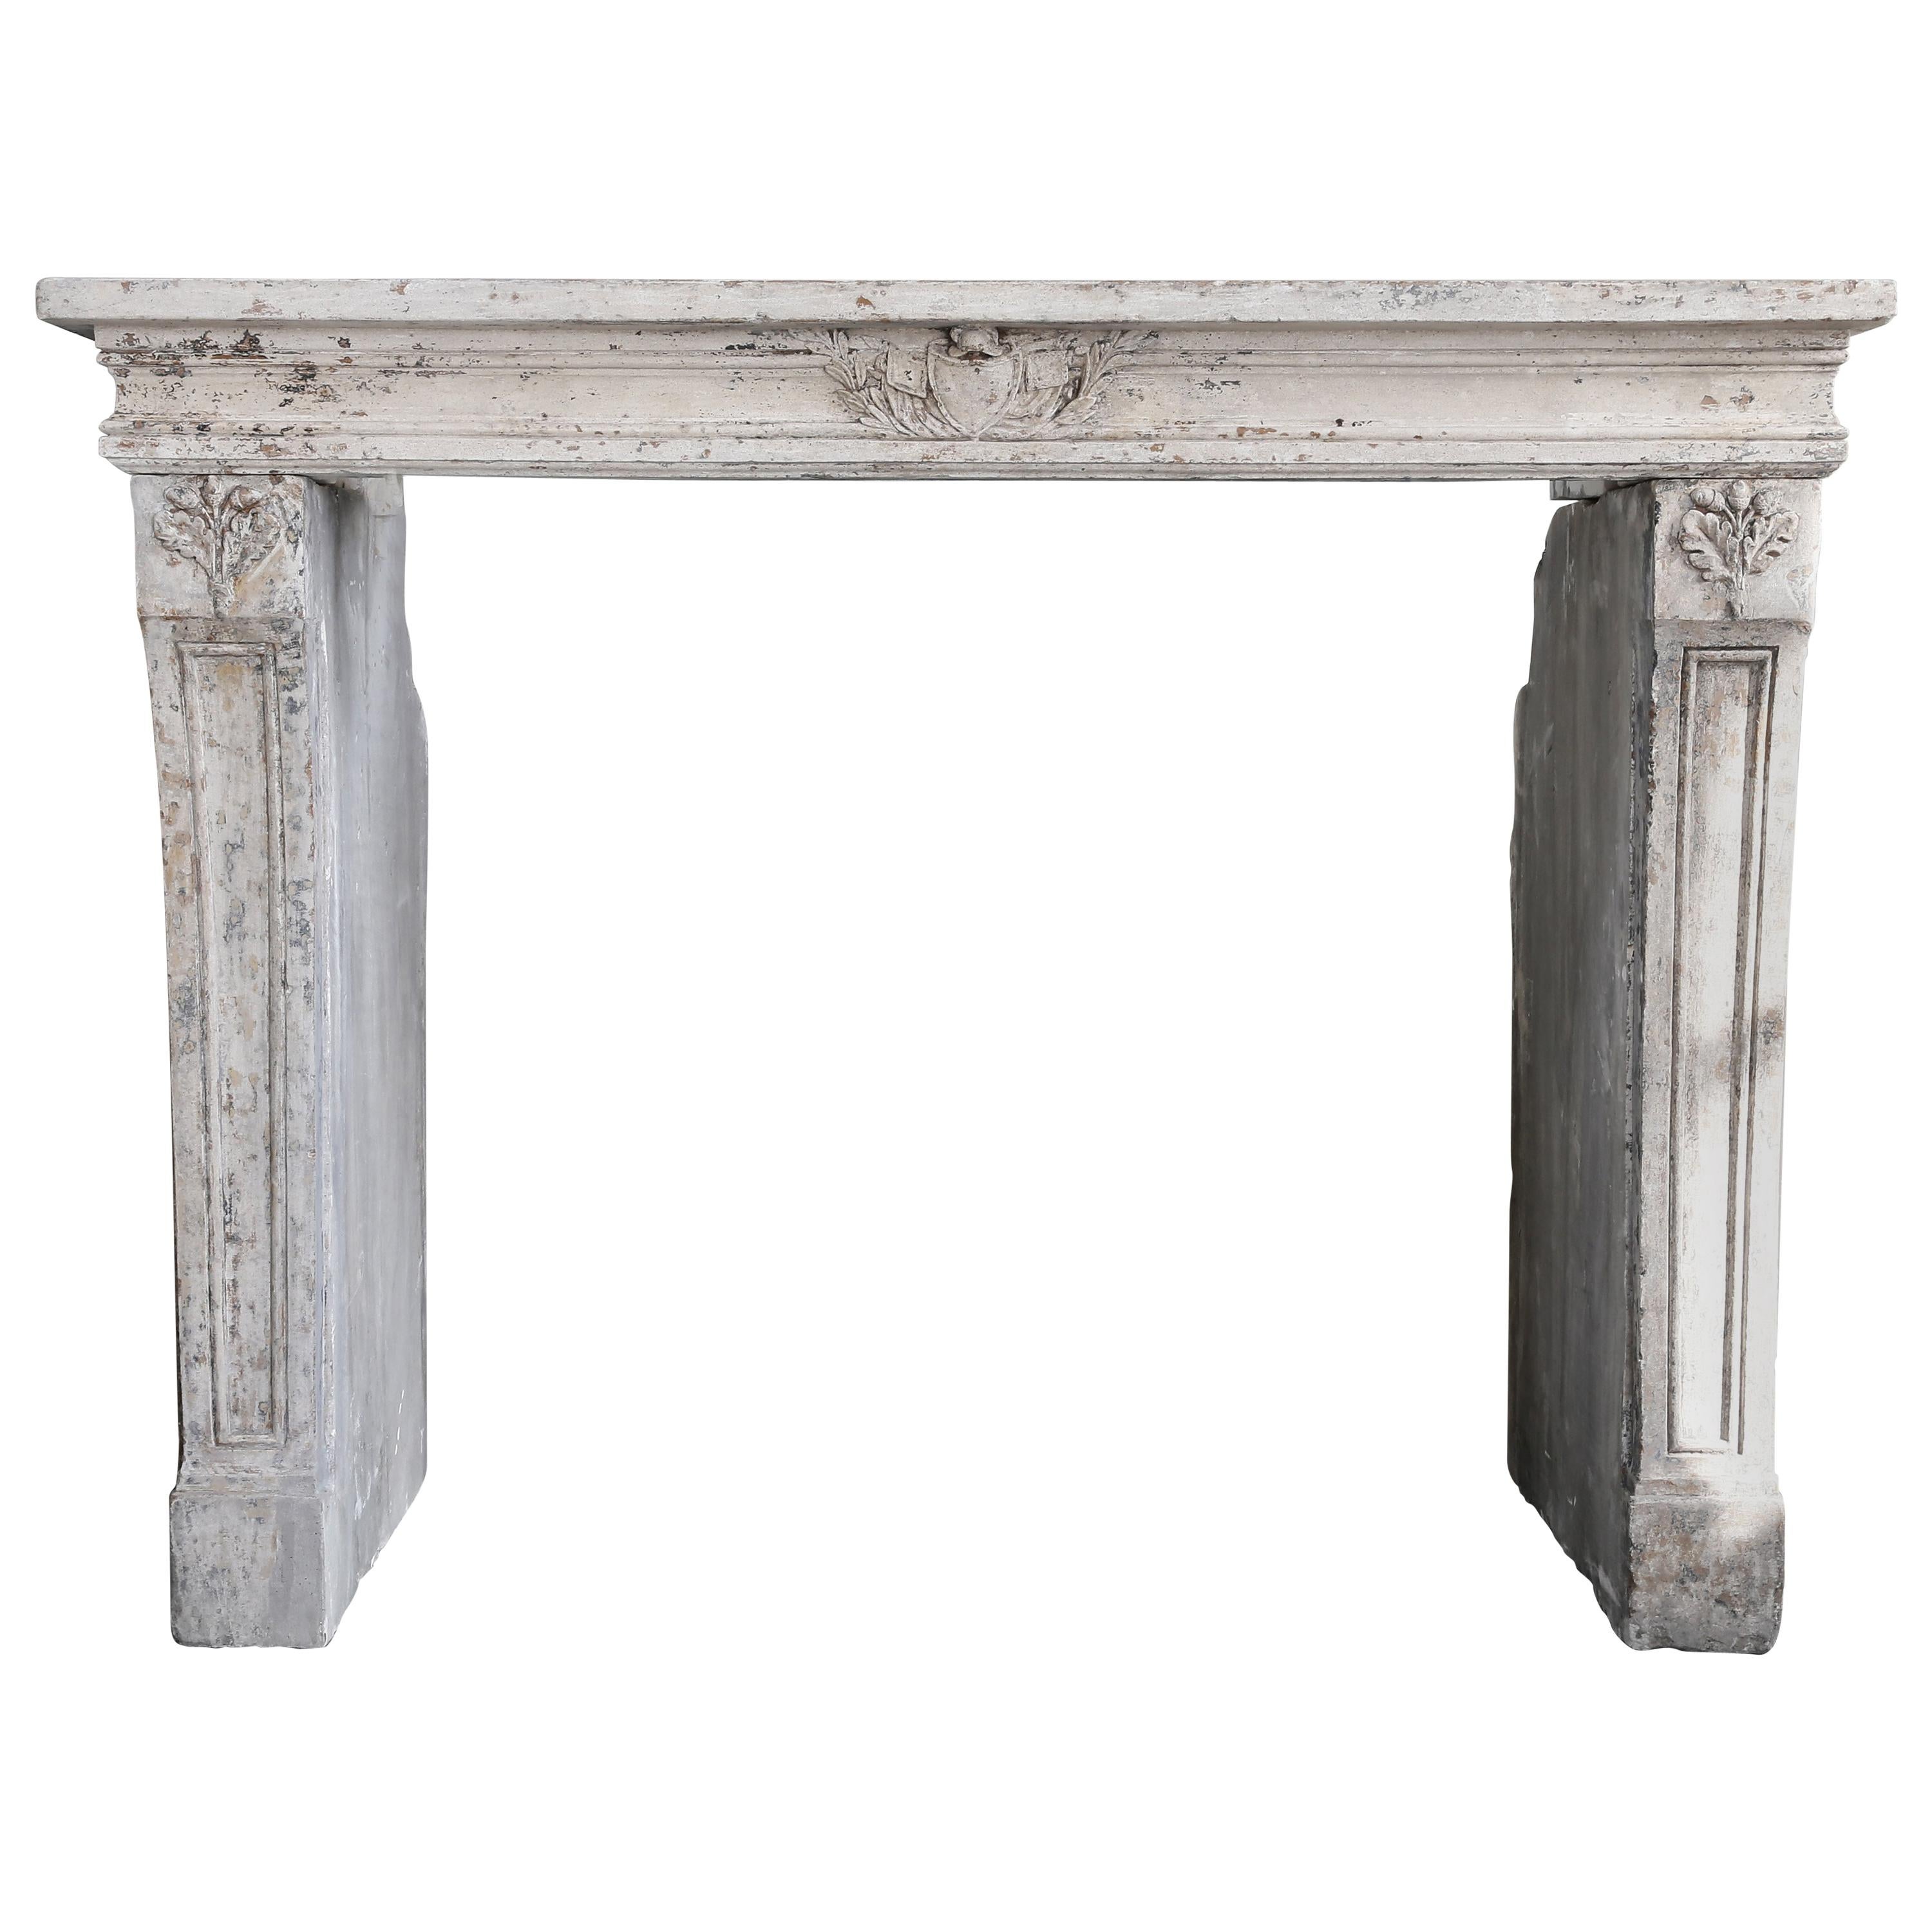 Antique Fireplace of French Limestone, Louis XVI Style, 19th Century